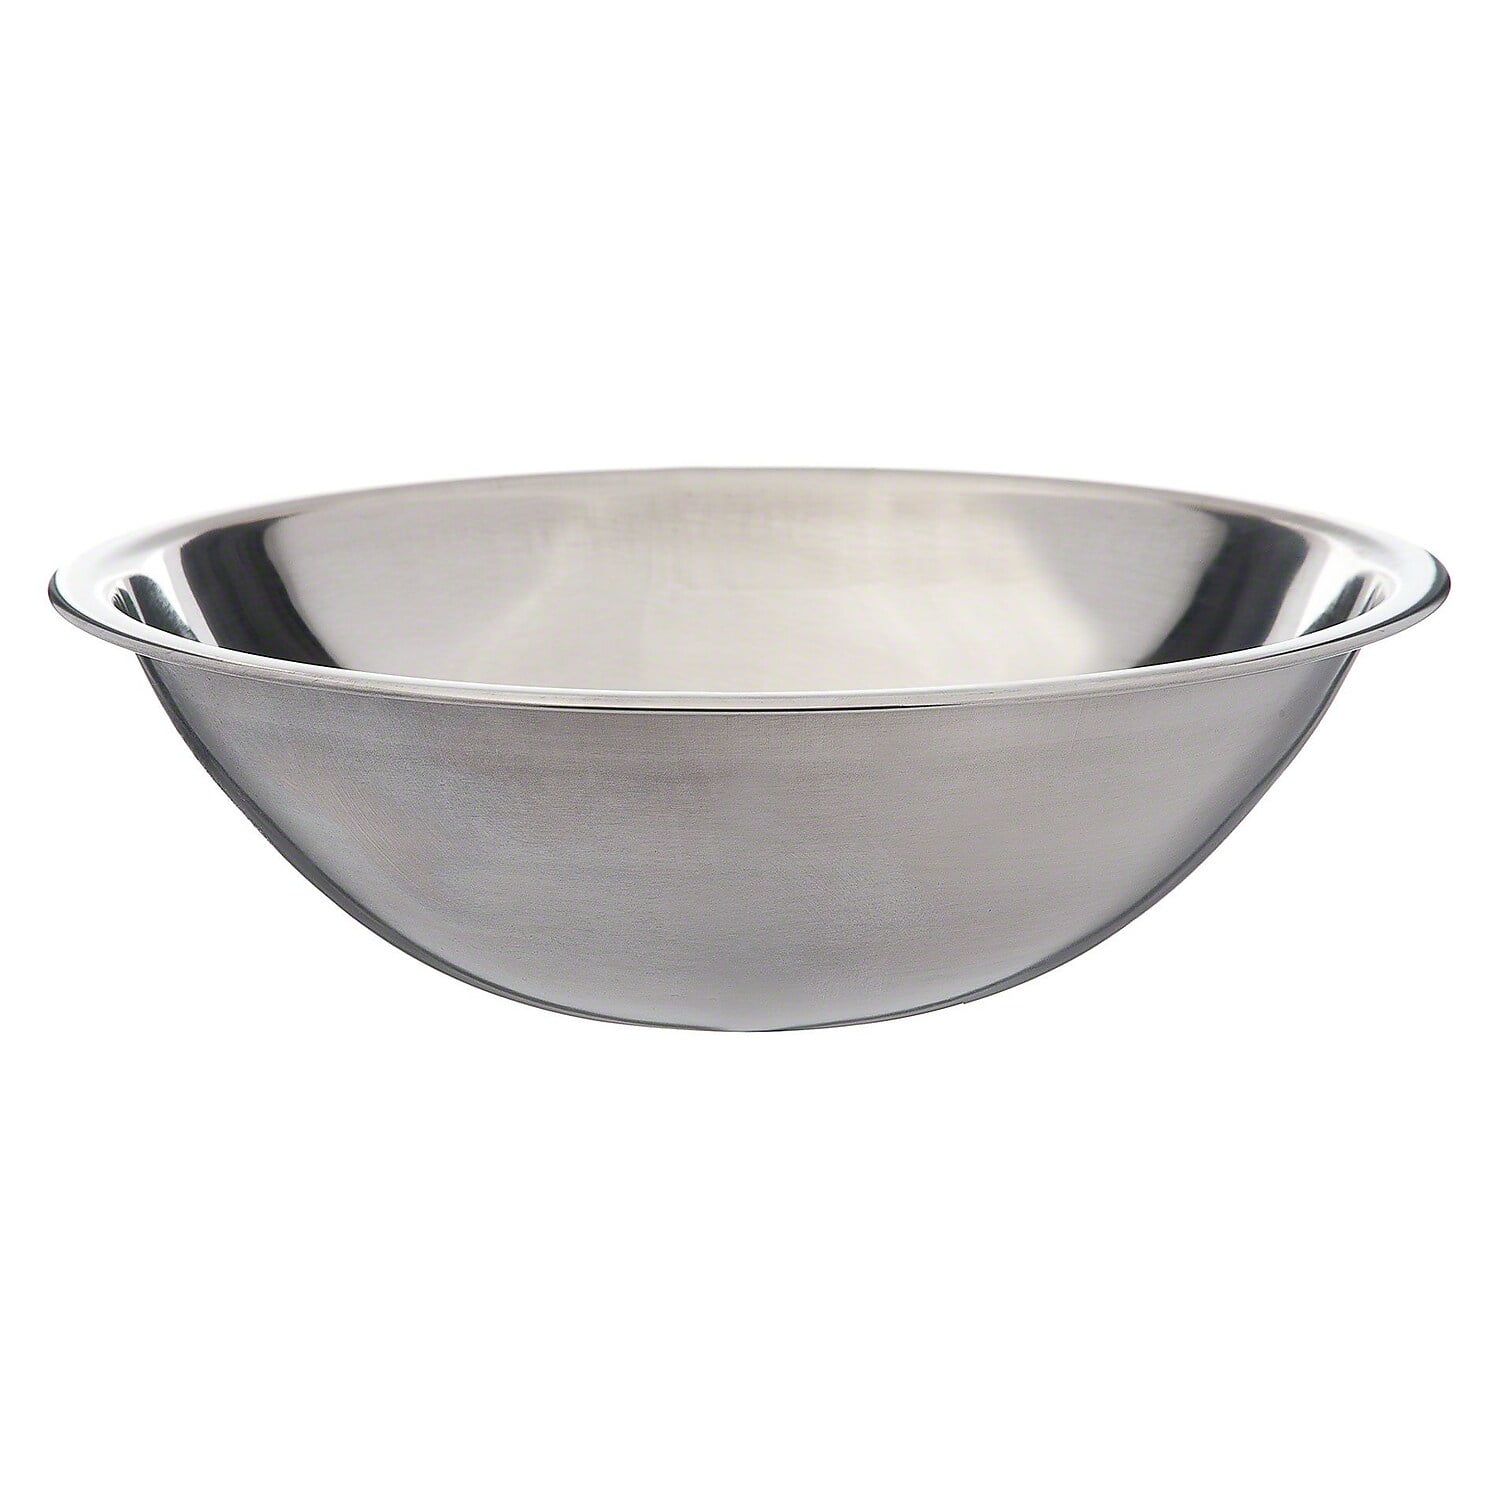 17.5 Extra Large Stainless Steel Mixing Bowl Large Unbranded